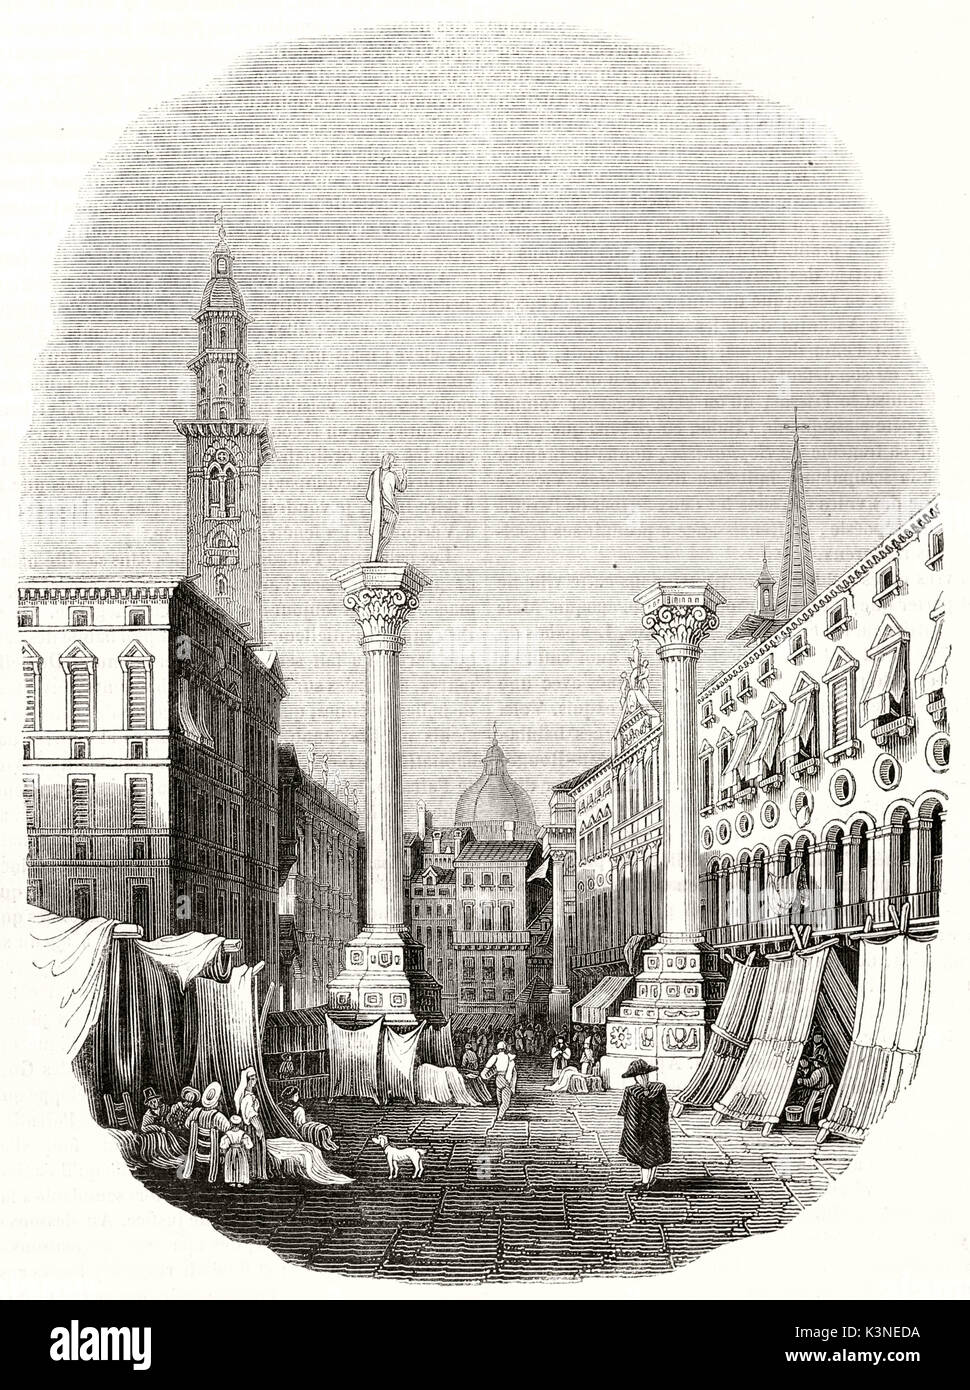 Ancient view of Piazza dei Signori (Lord's square) Vicenza Italy, illustration arranged in a oval frame with faded edges. By unidentified author published on Magasin Pittoresque Paris 1839 Stock Photo